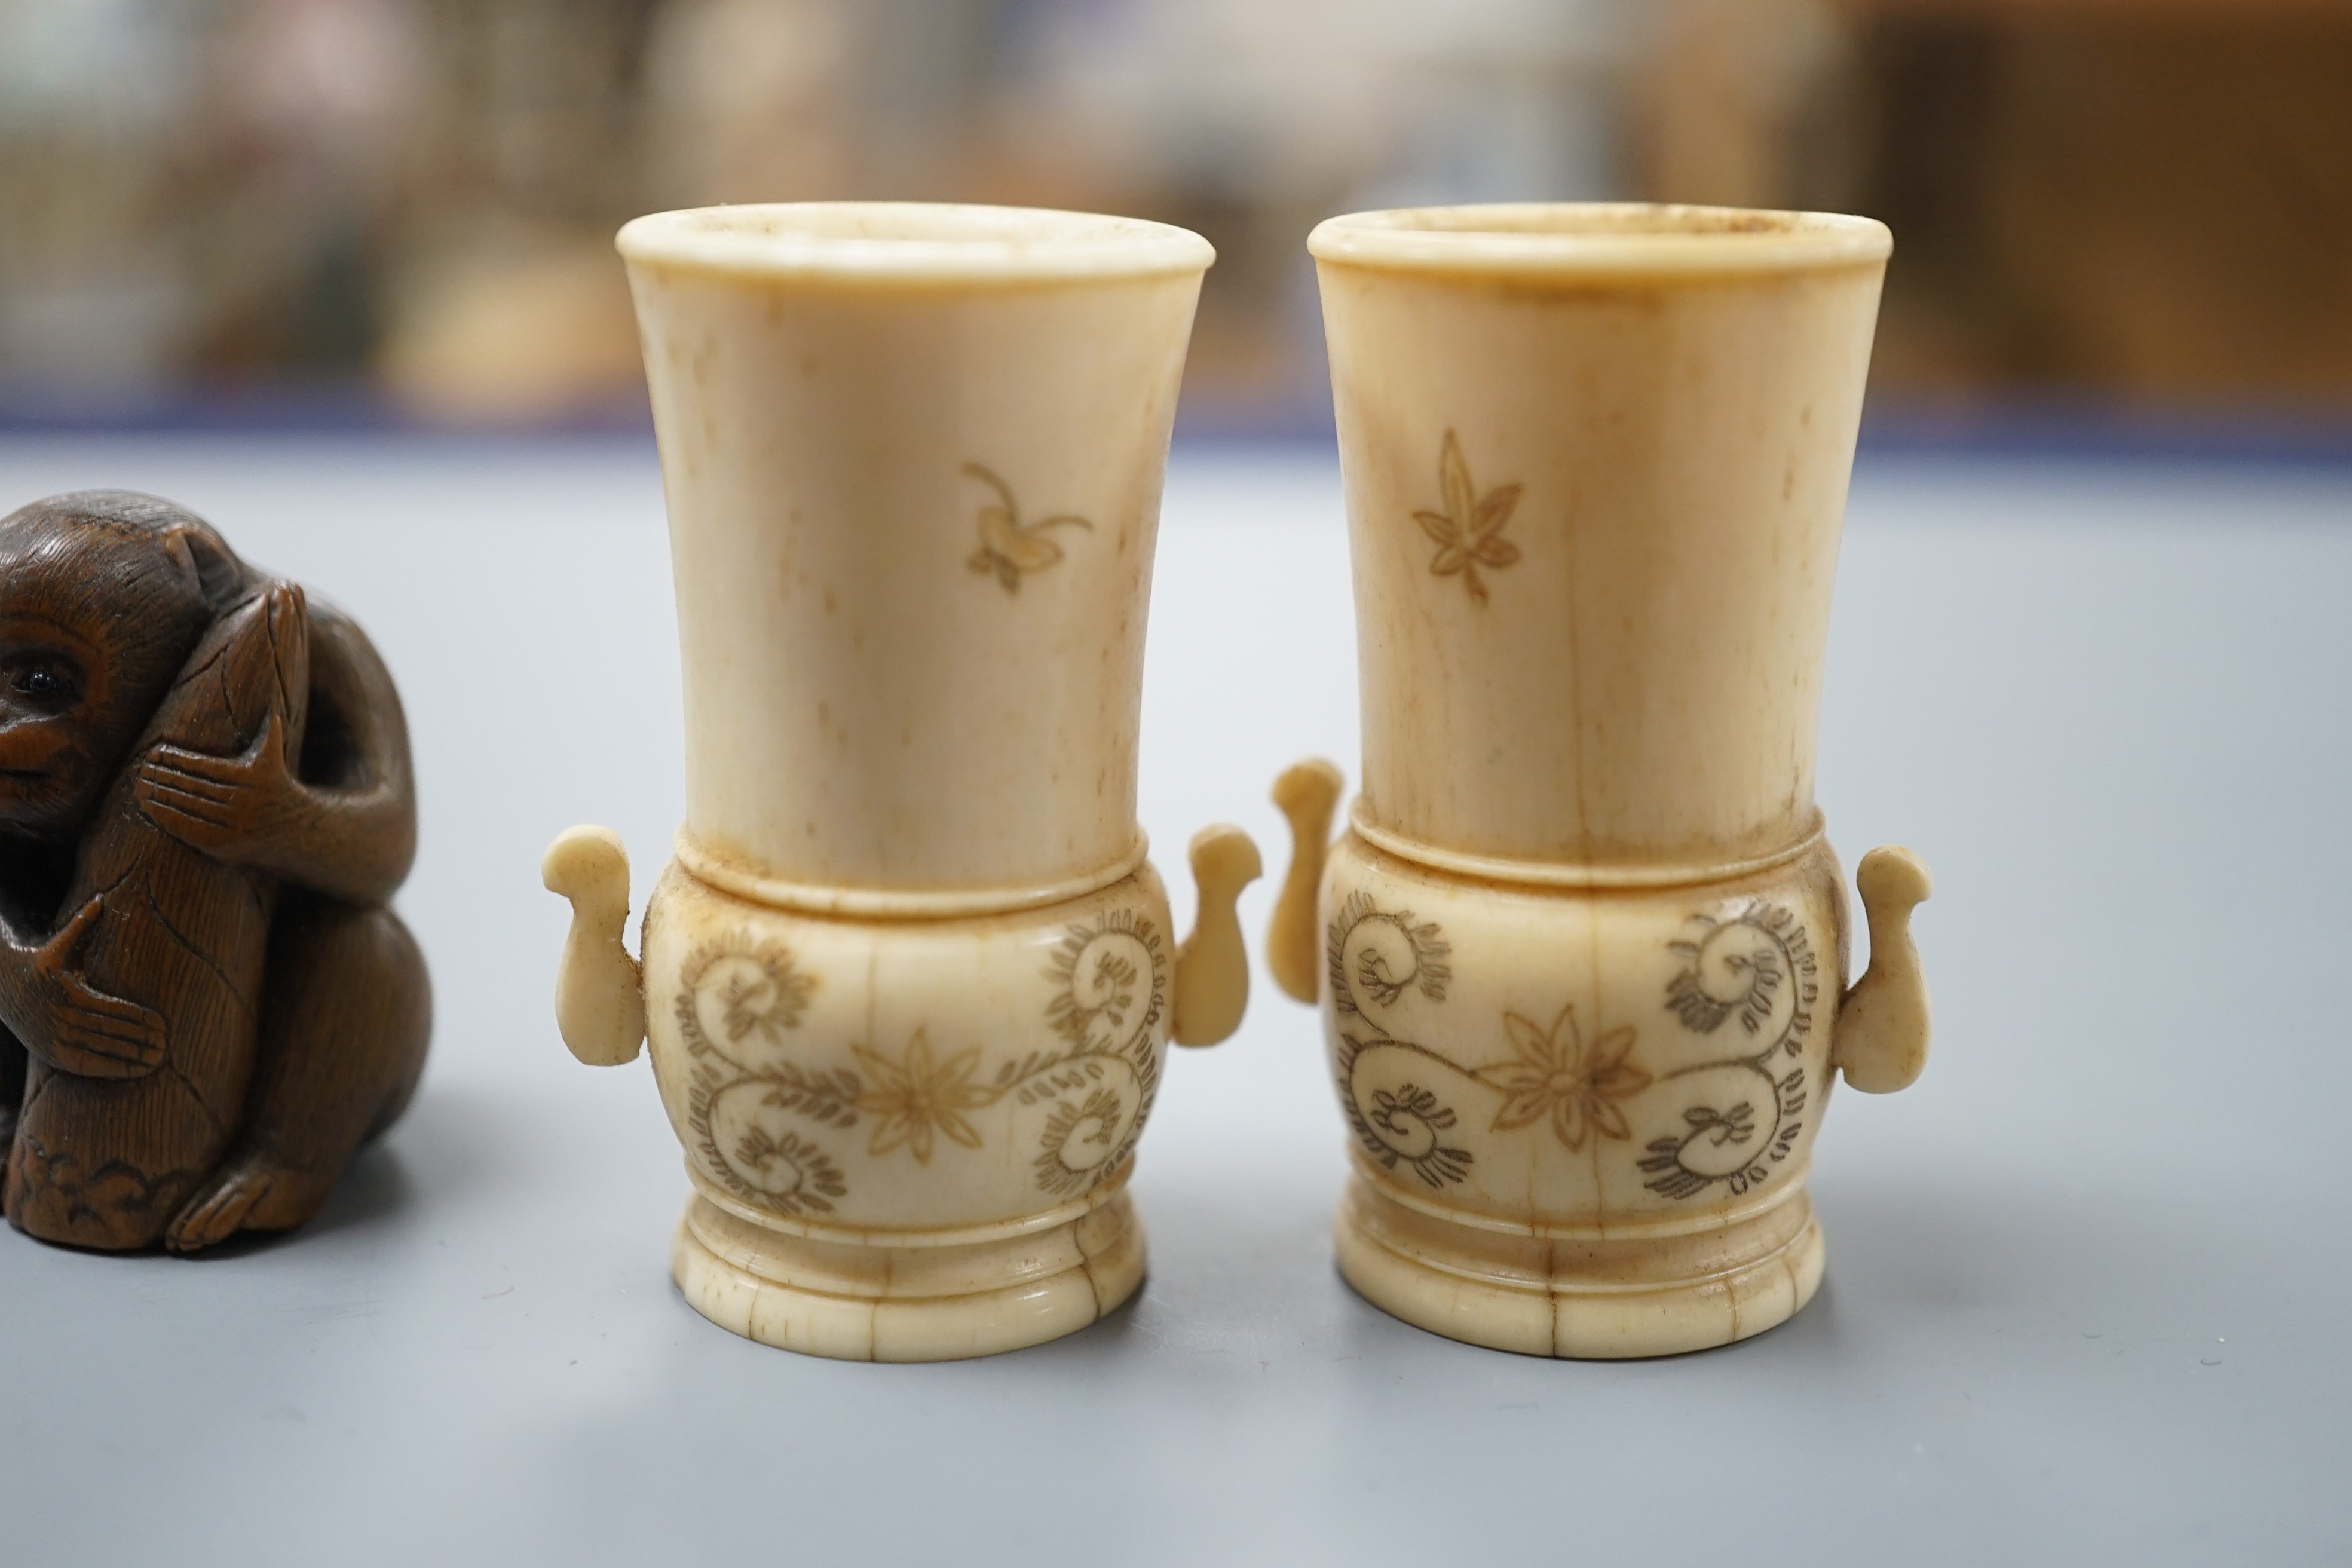 A pair of early 20th century Japanese miniature ivory vases, 5.3 cm, engraved with a lady and a wood netsuke in the form of a monkey holding a bamboo shoot (3)